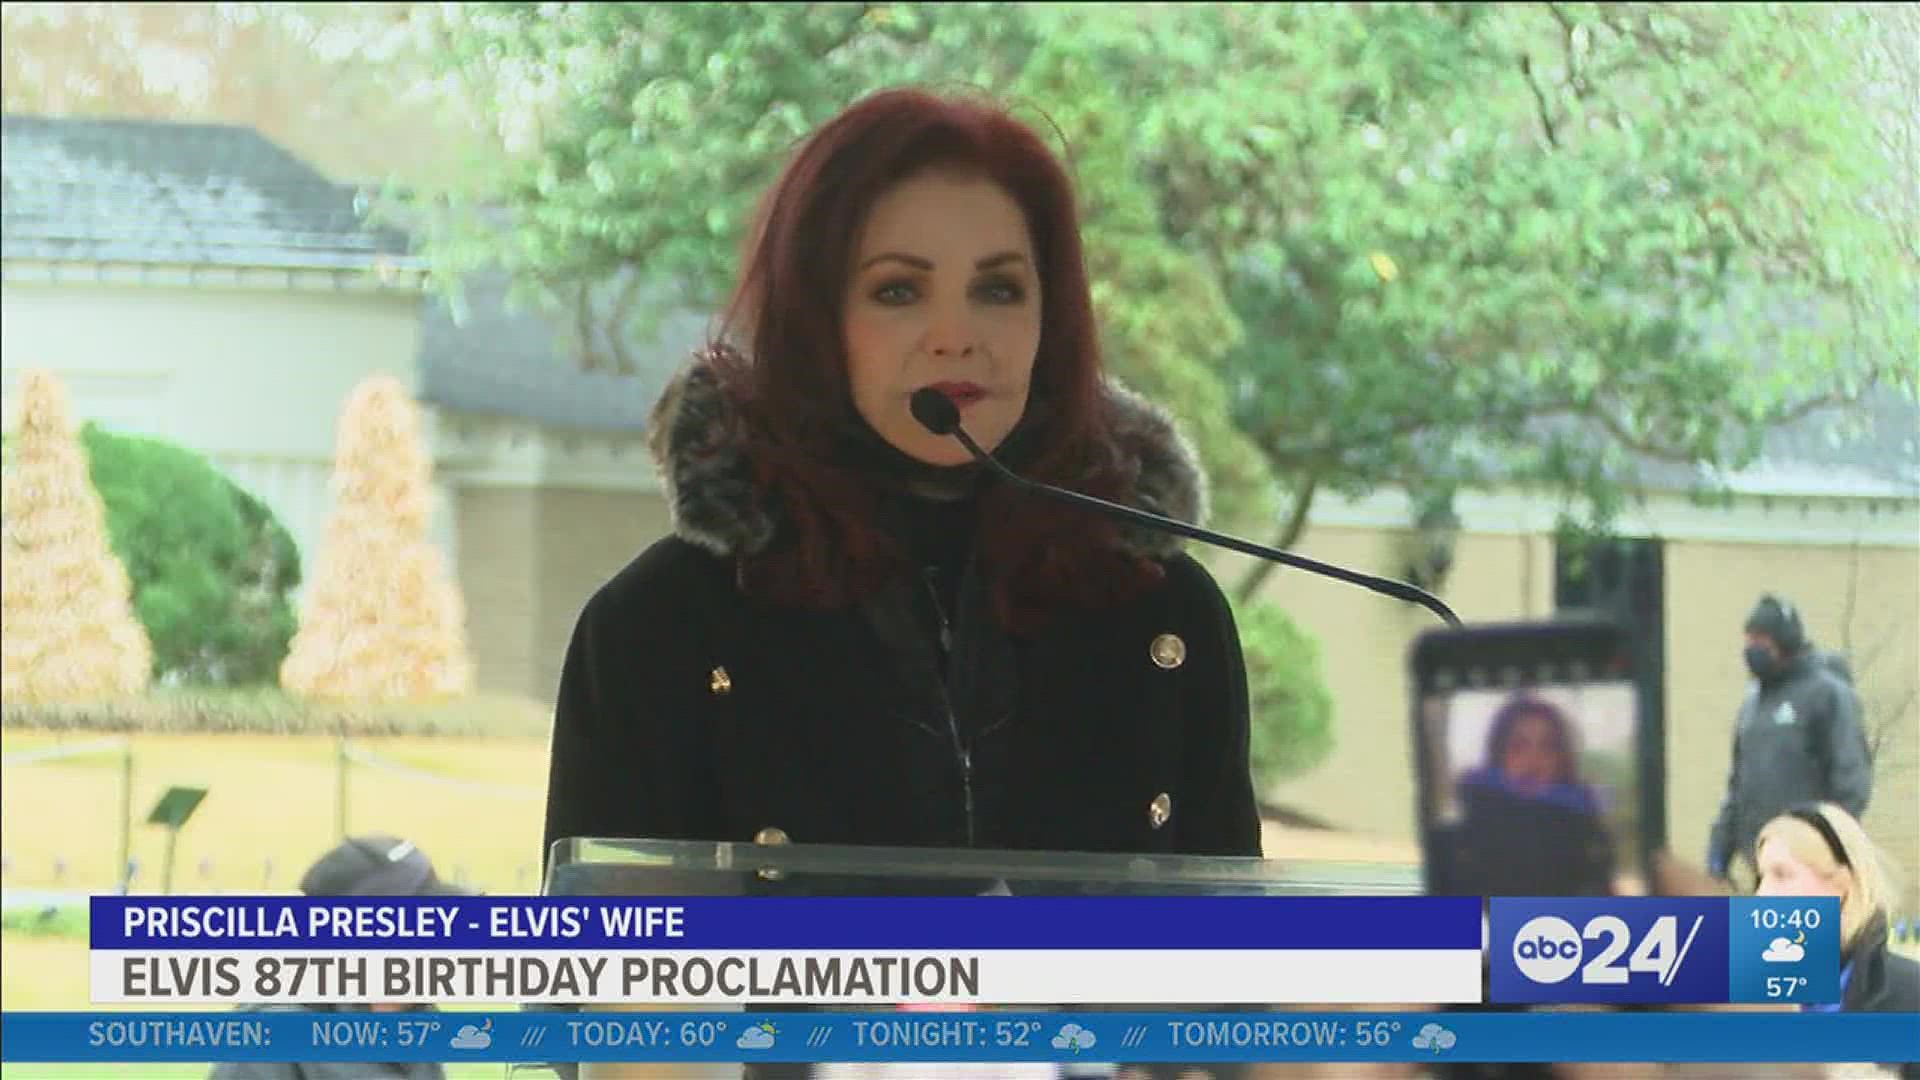 Saturday would have been Elvis Presley's 87th birthday and Graceland had its annual birthday celebration weekend.